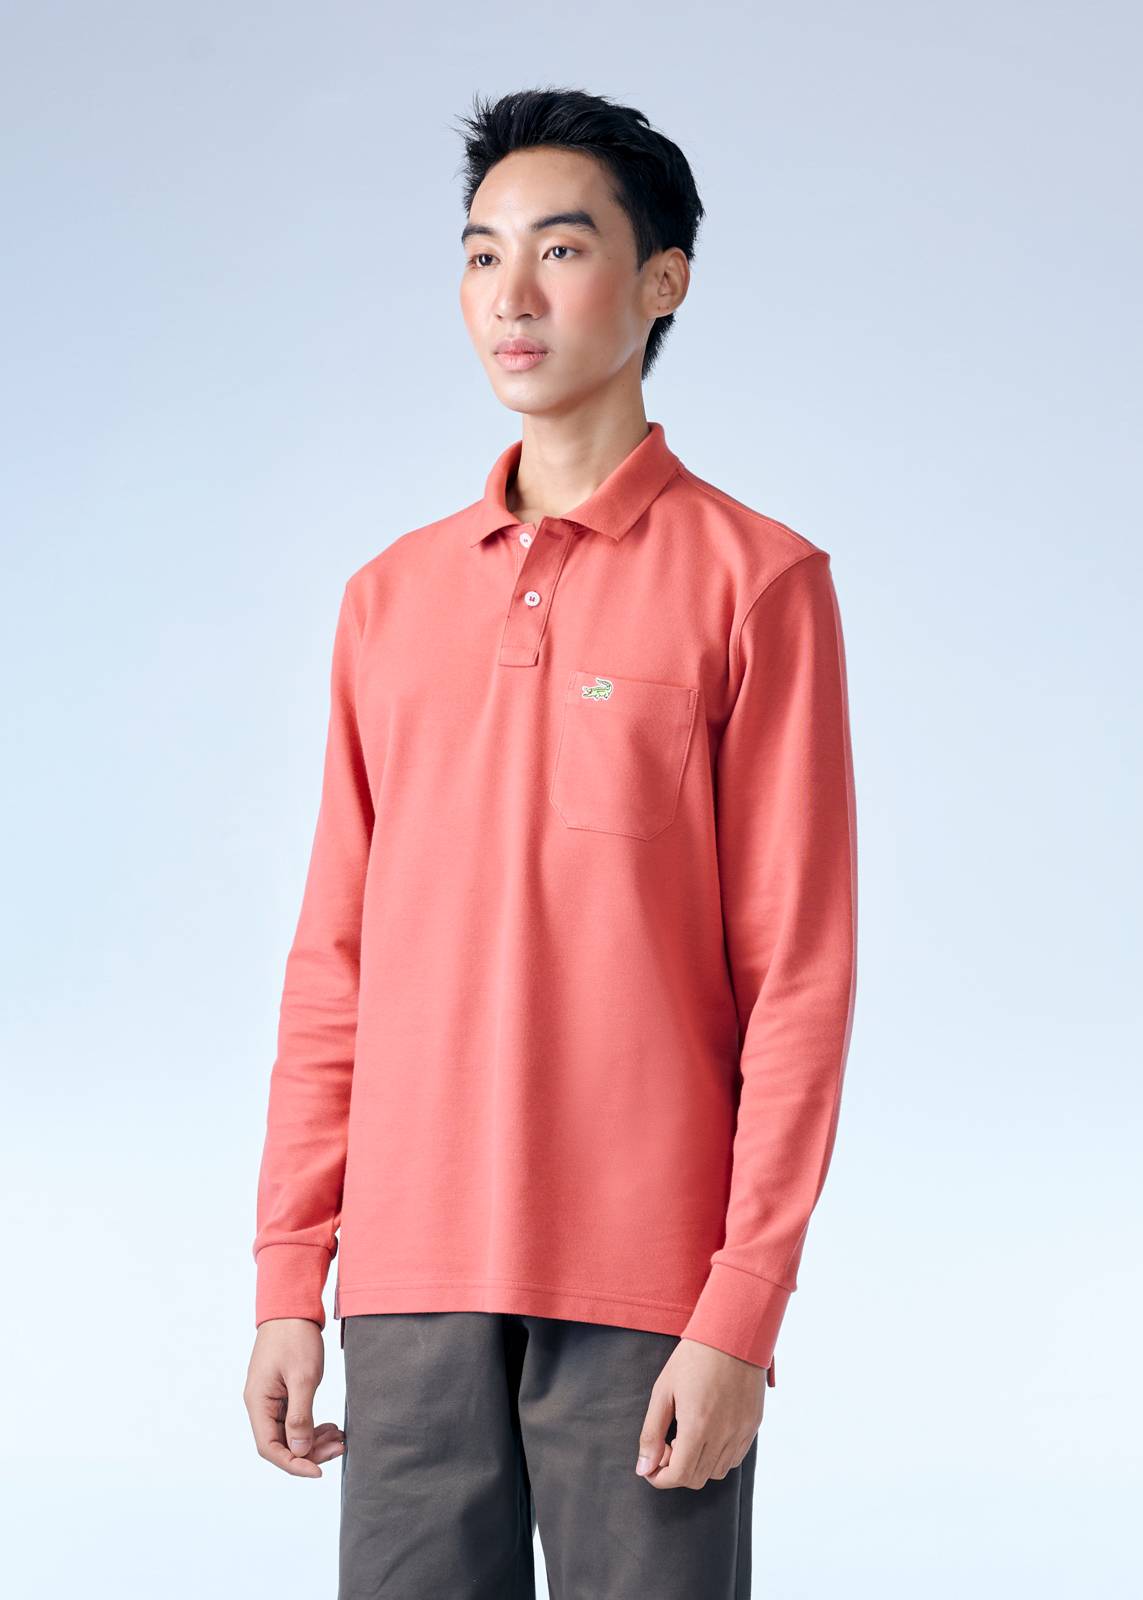 ASTRO DUST RED CUSTOM FIT LONG SLEEVE POLO SHIRT